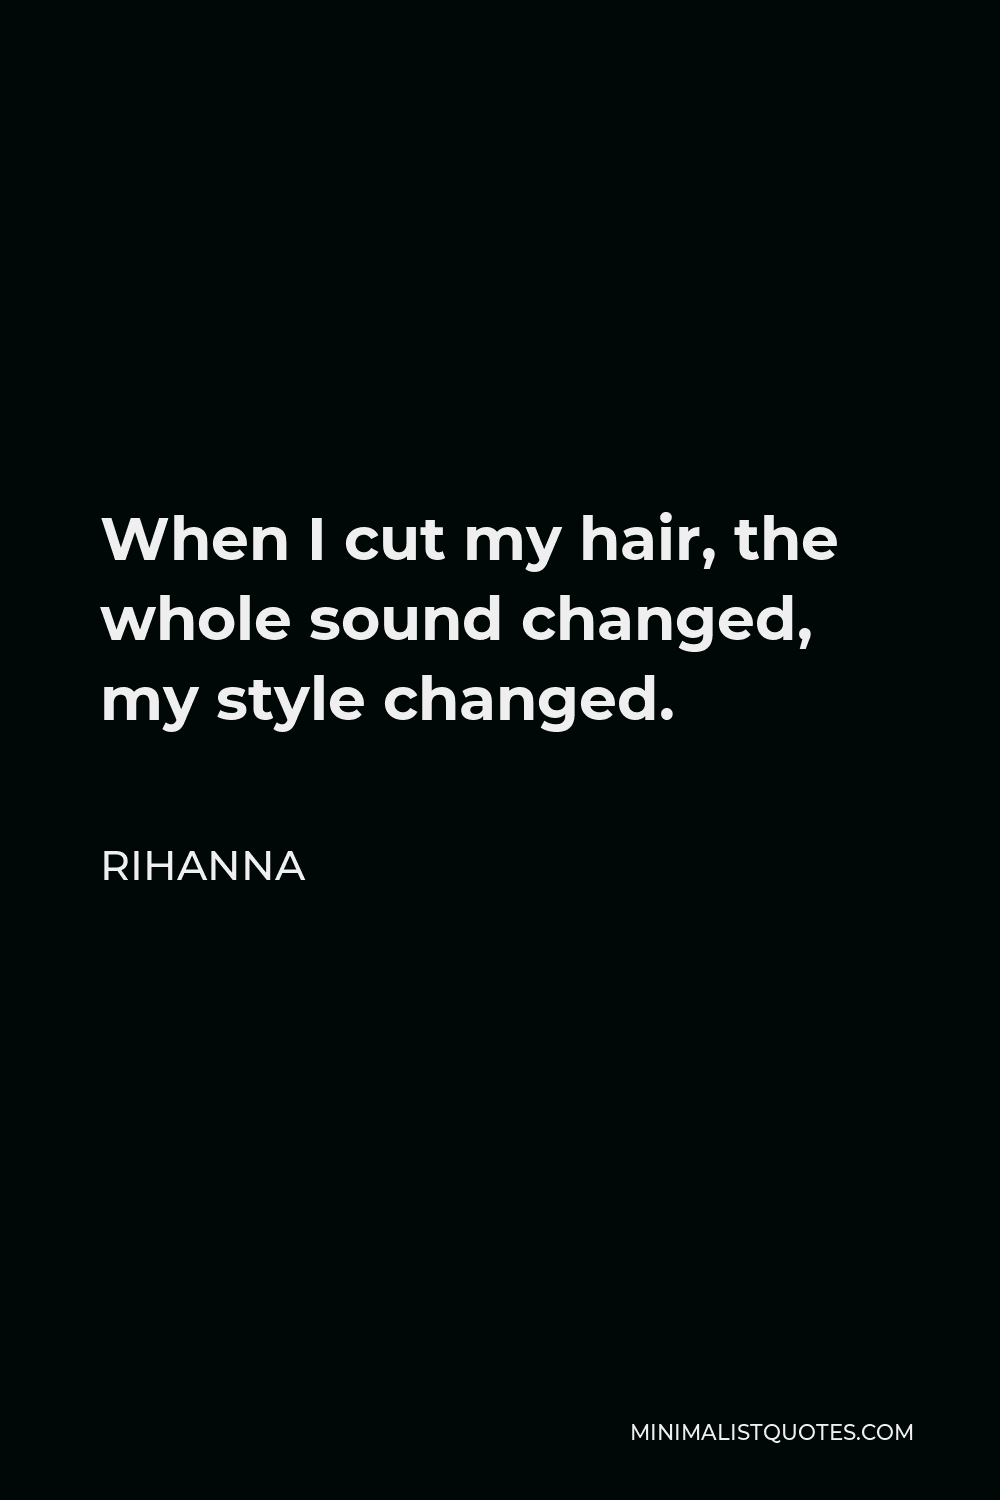 Rihanna Quote: When I cut my hair, the whole sound changed, my style  changed.